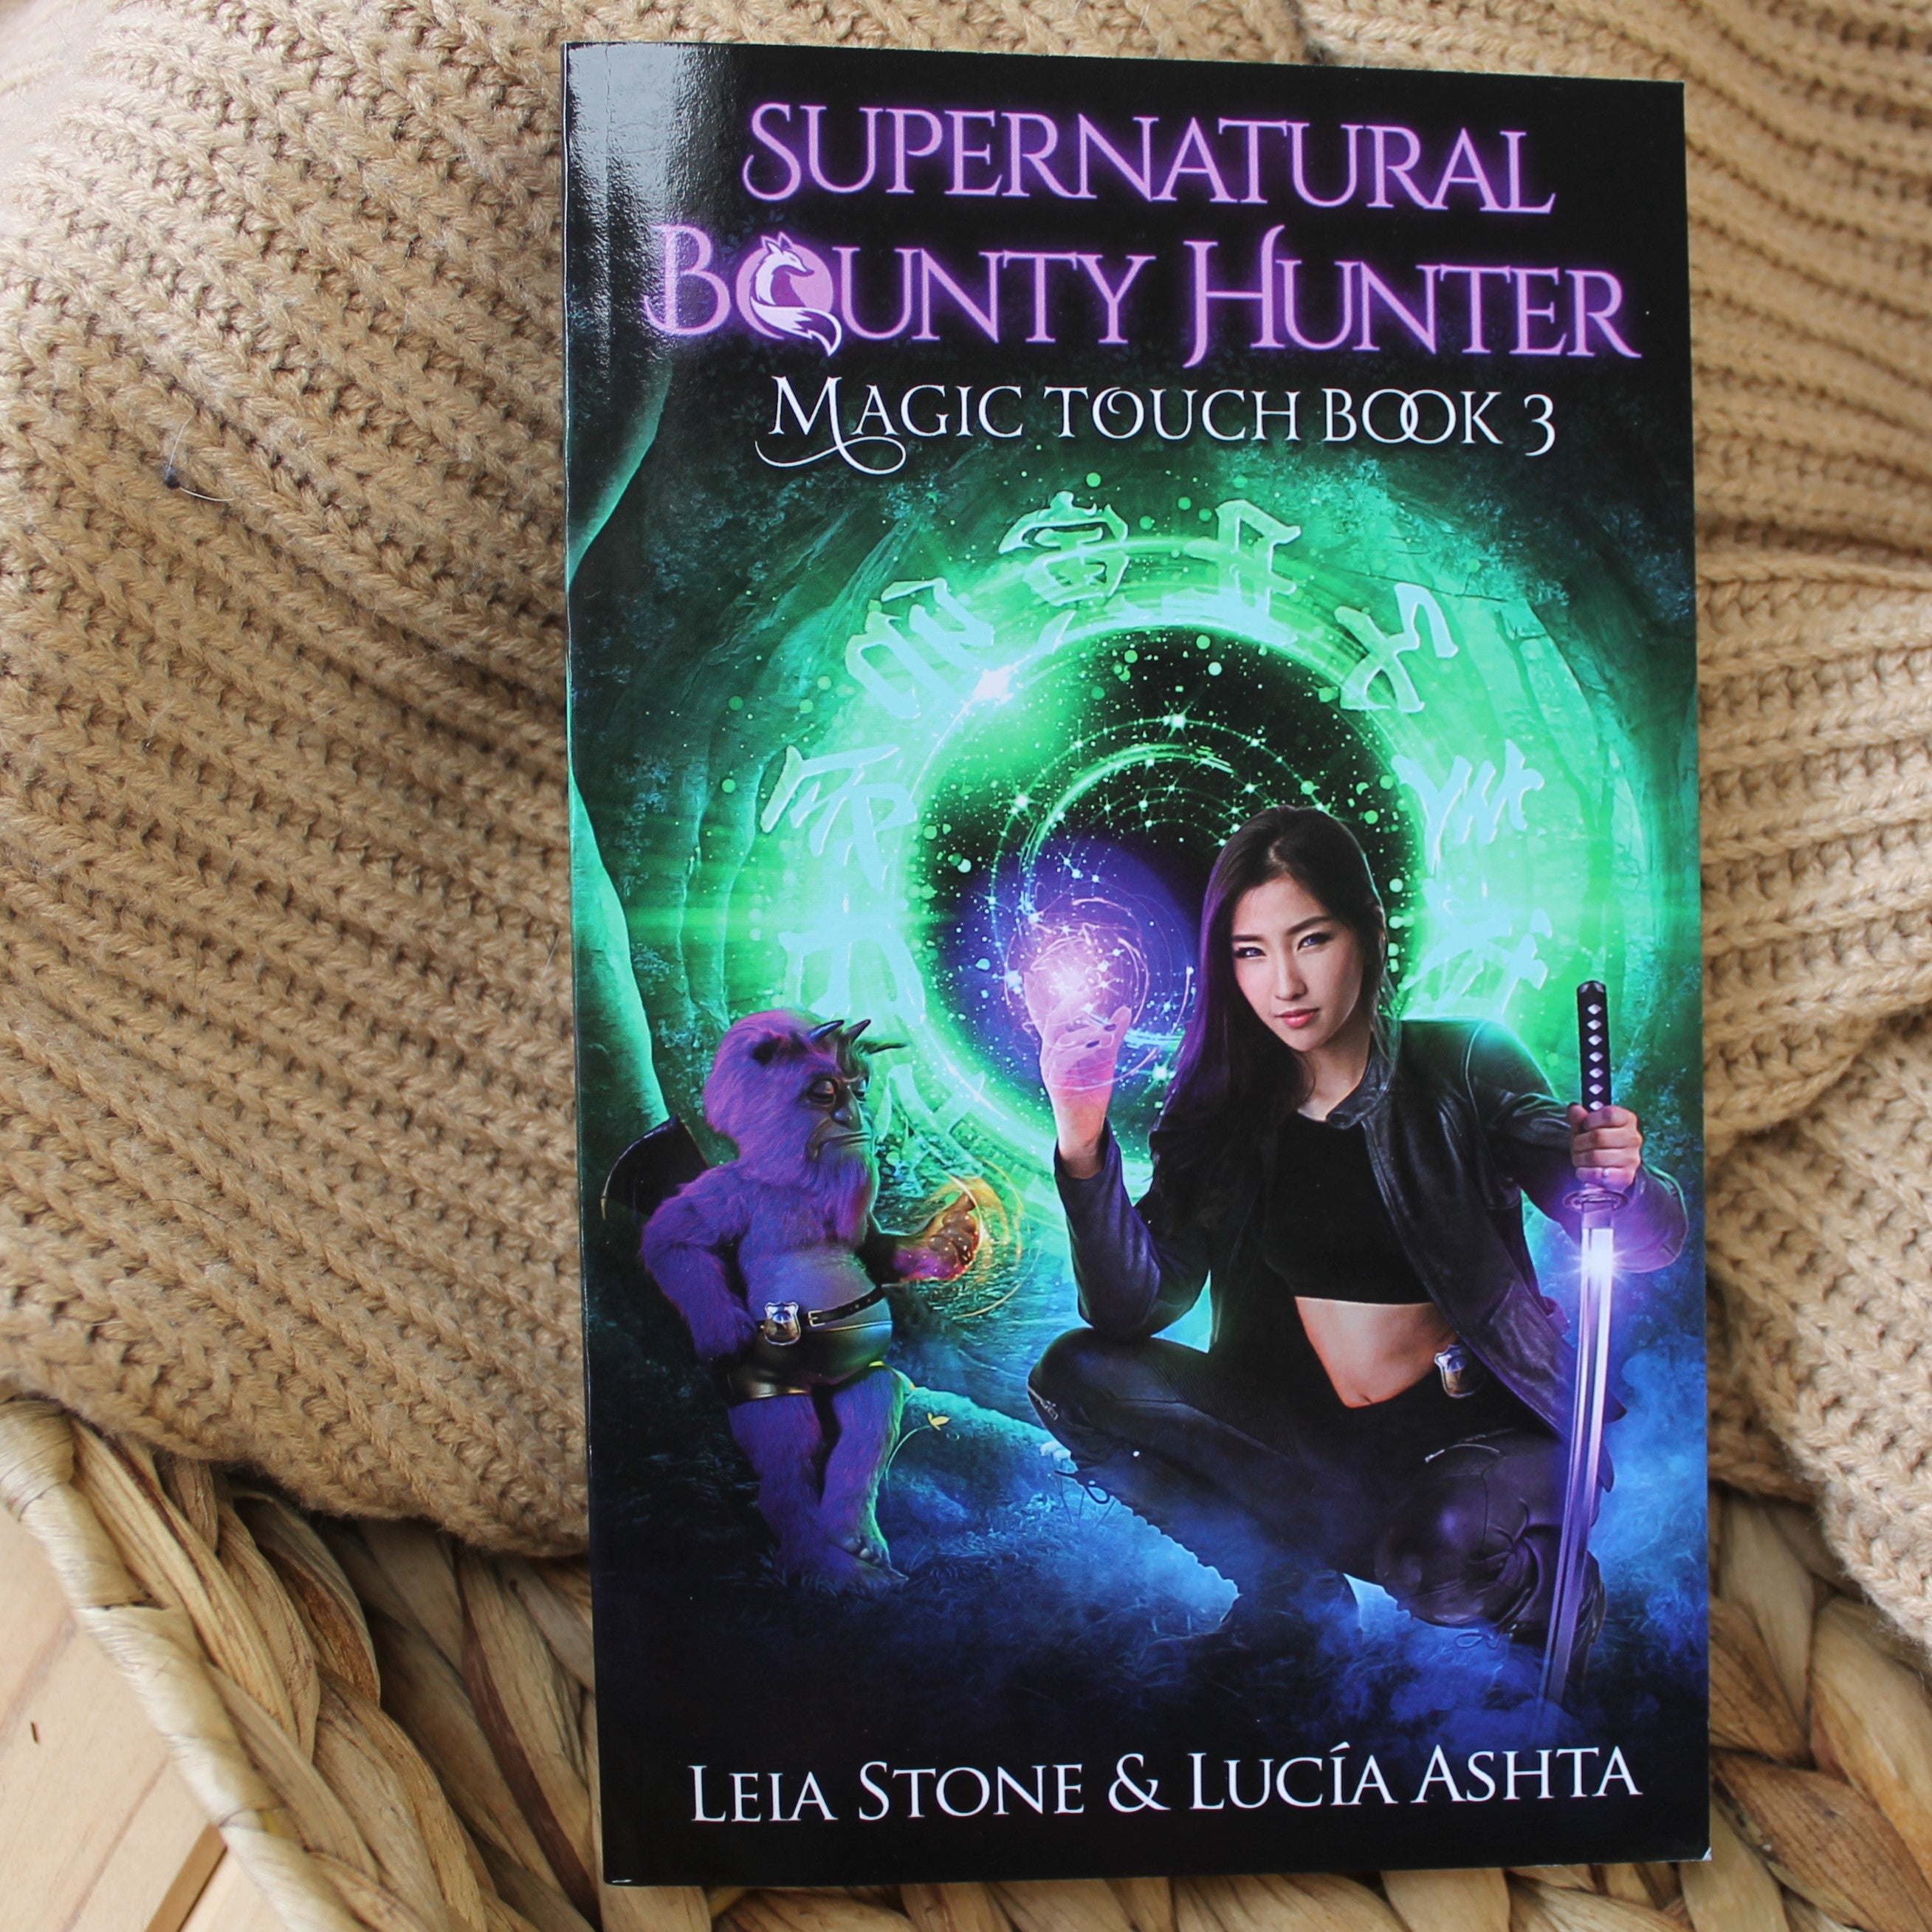 Supernatural Bounty Hunter series (OLD COVERS) by Leia Stone & Lucia Ashta